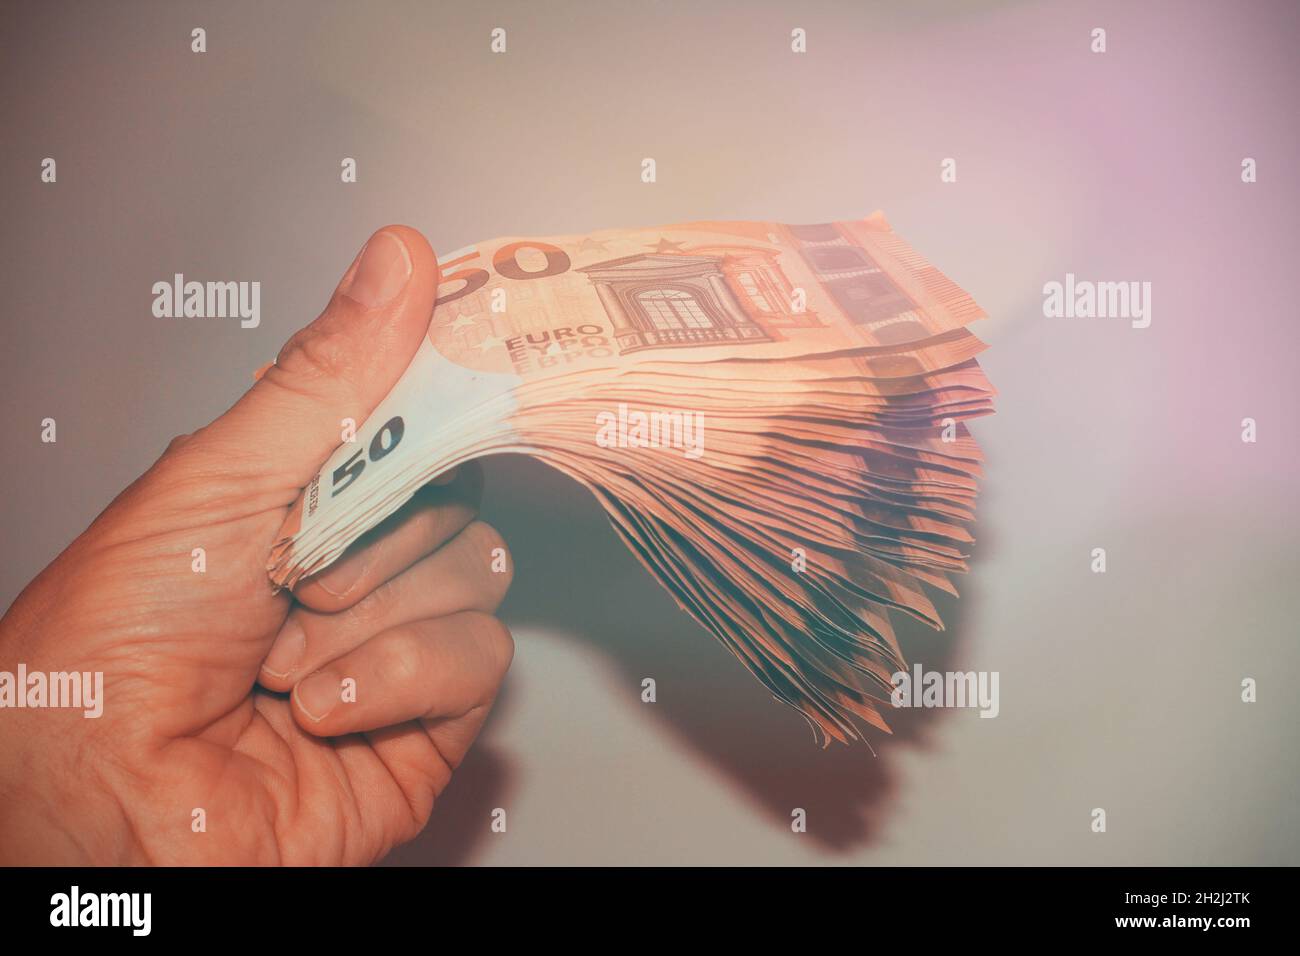 Money in hand with a flare. Stock Photo